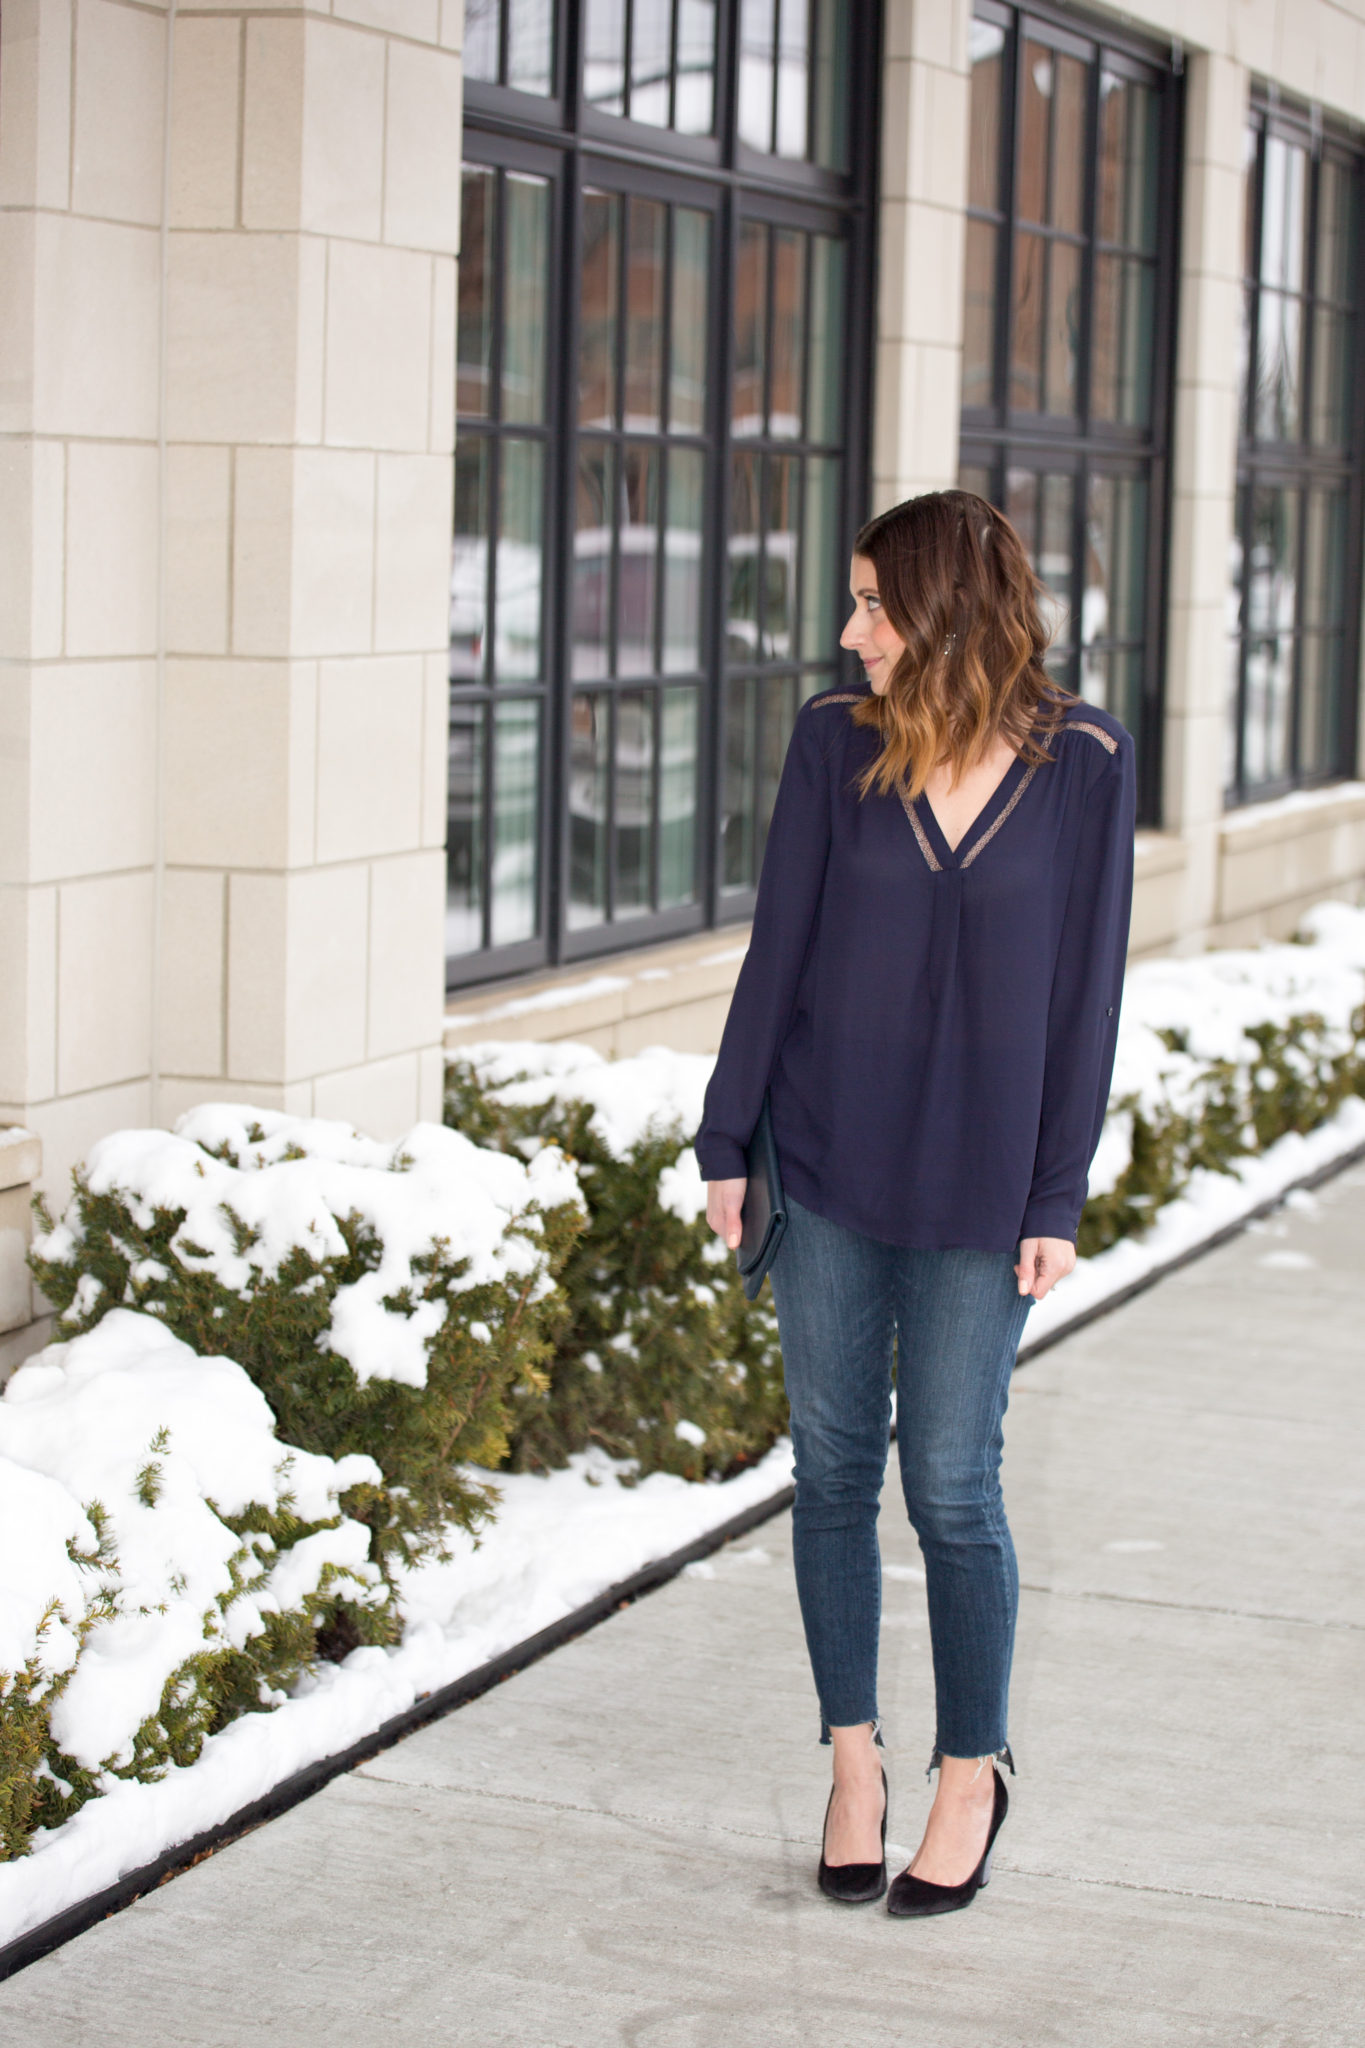 heartloom holiday top | what to wear for a casual winter date night on allweareblog.com